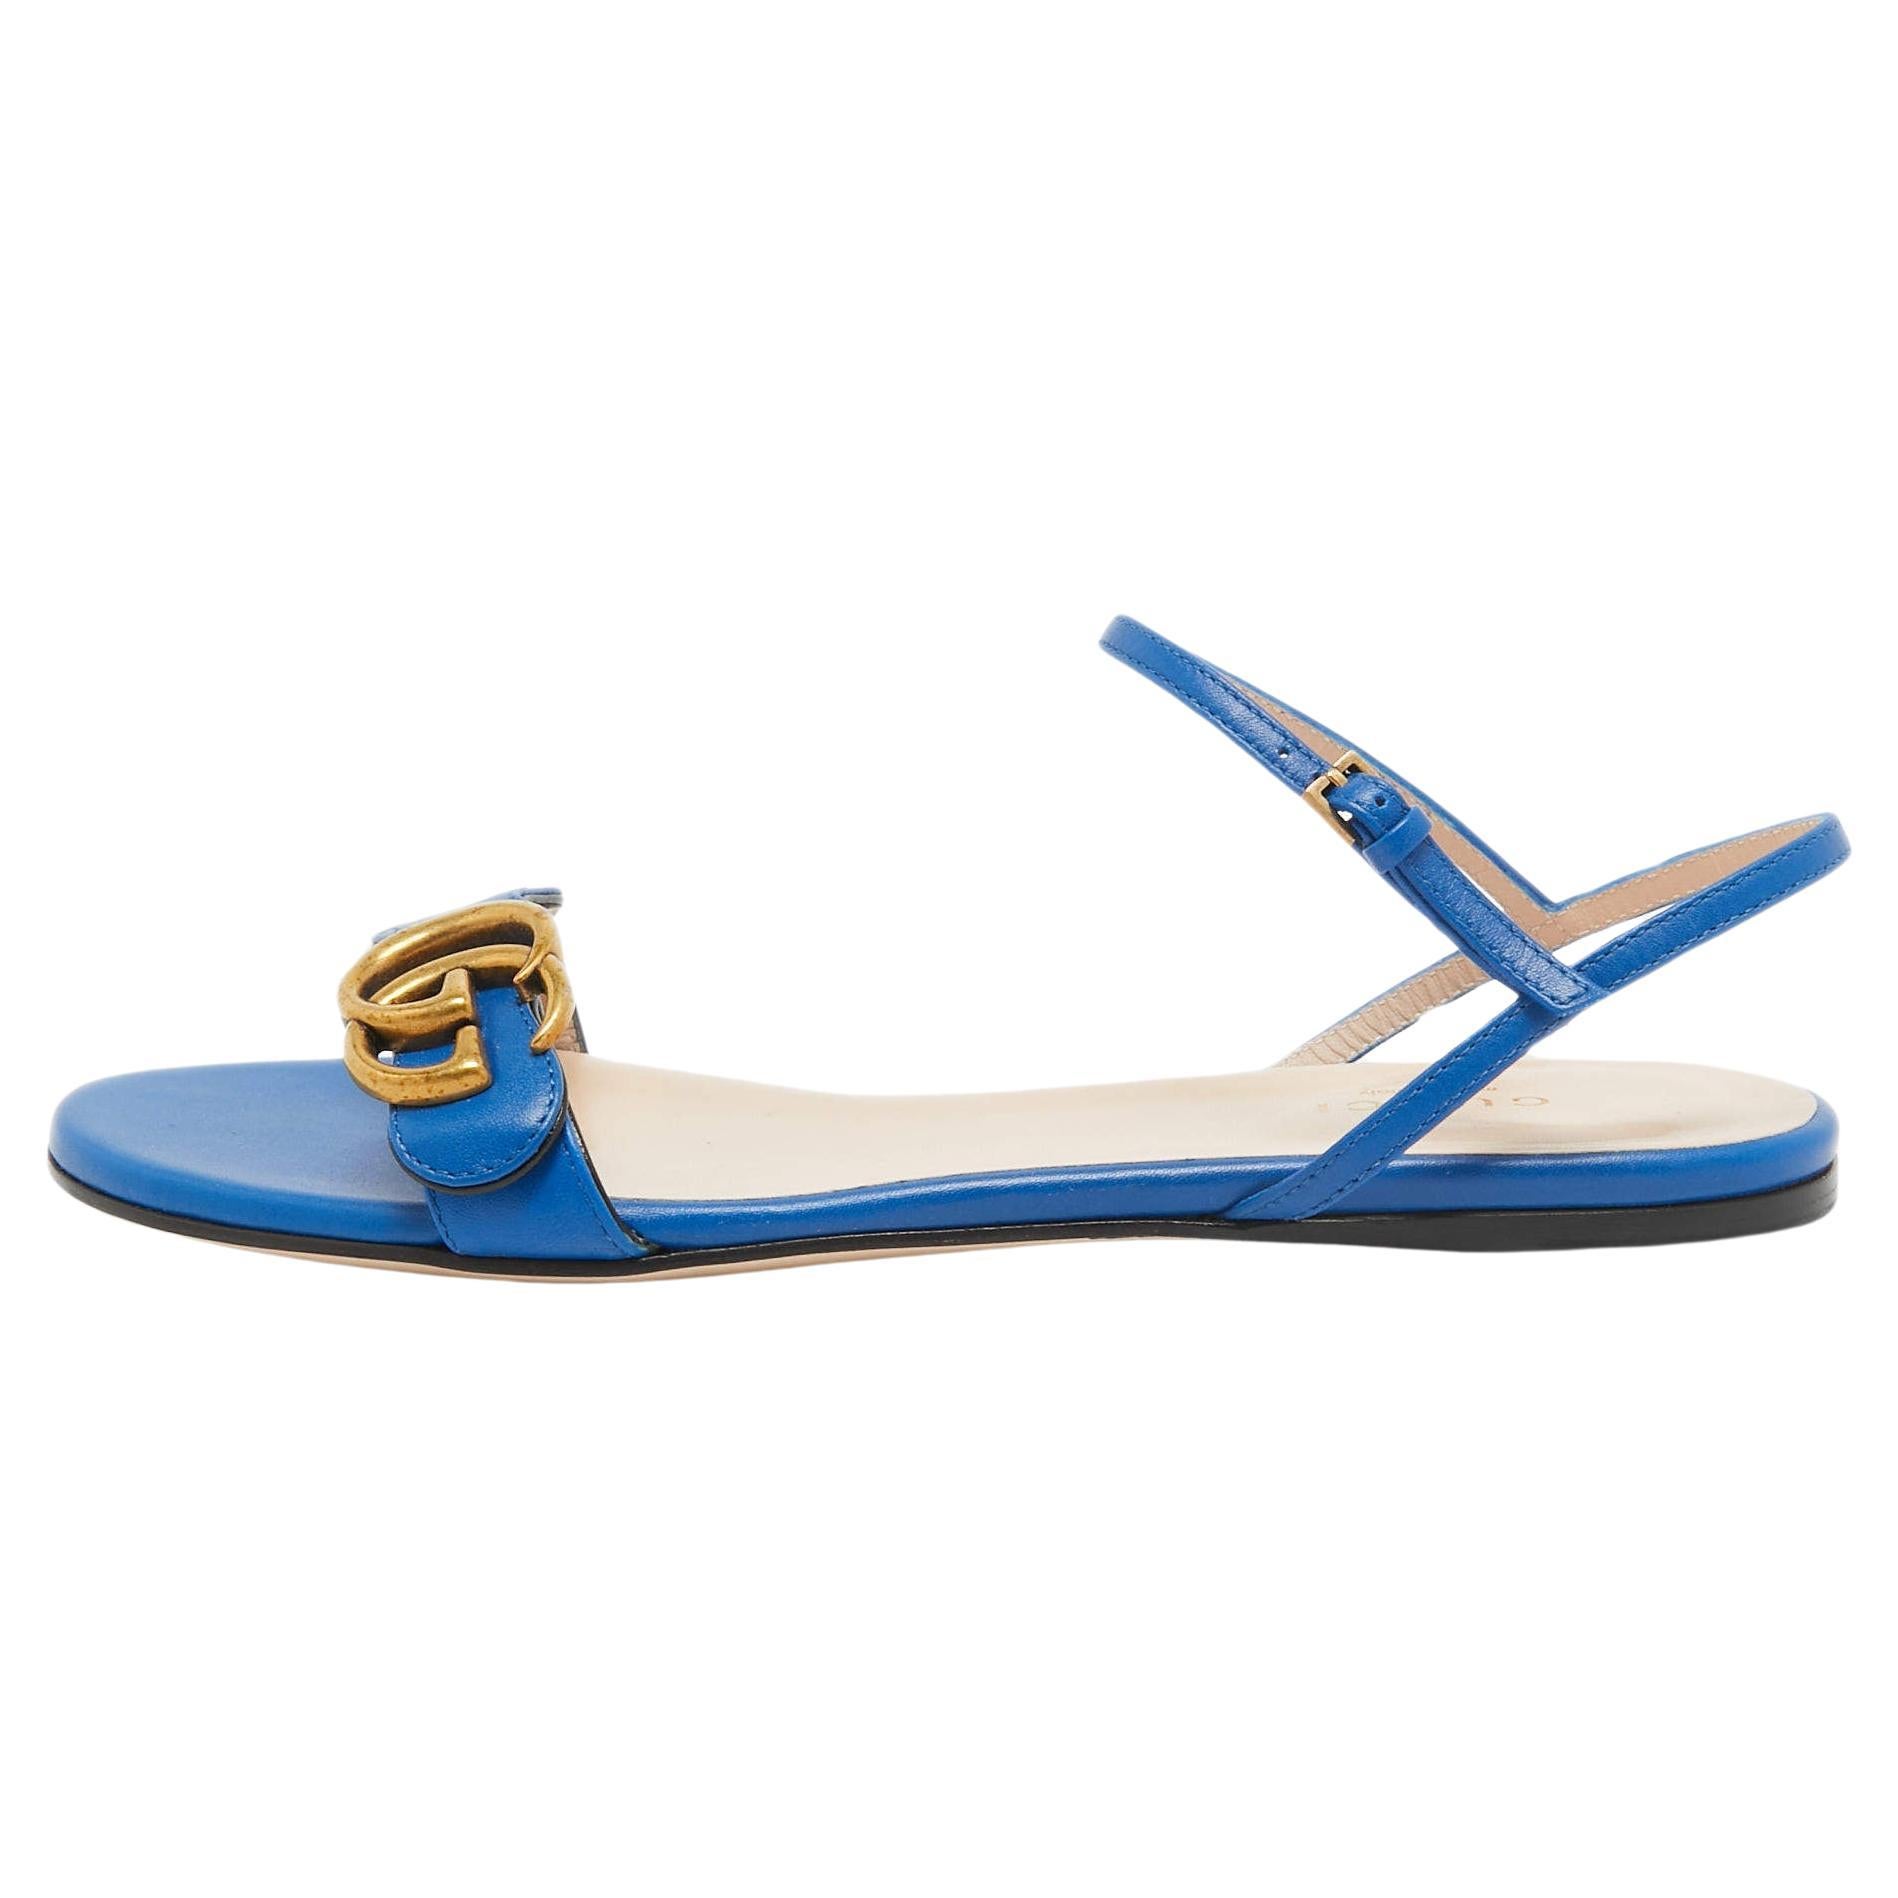 Gucci Blue Leather GG Marmont Flat Slides Size 37